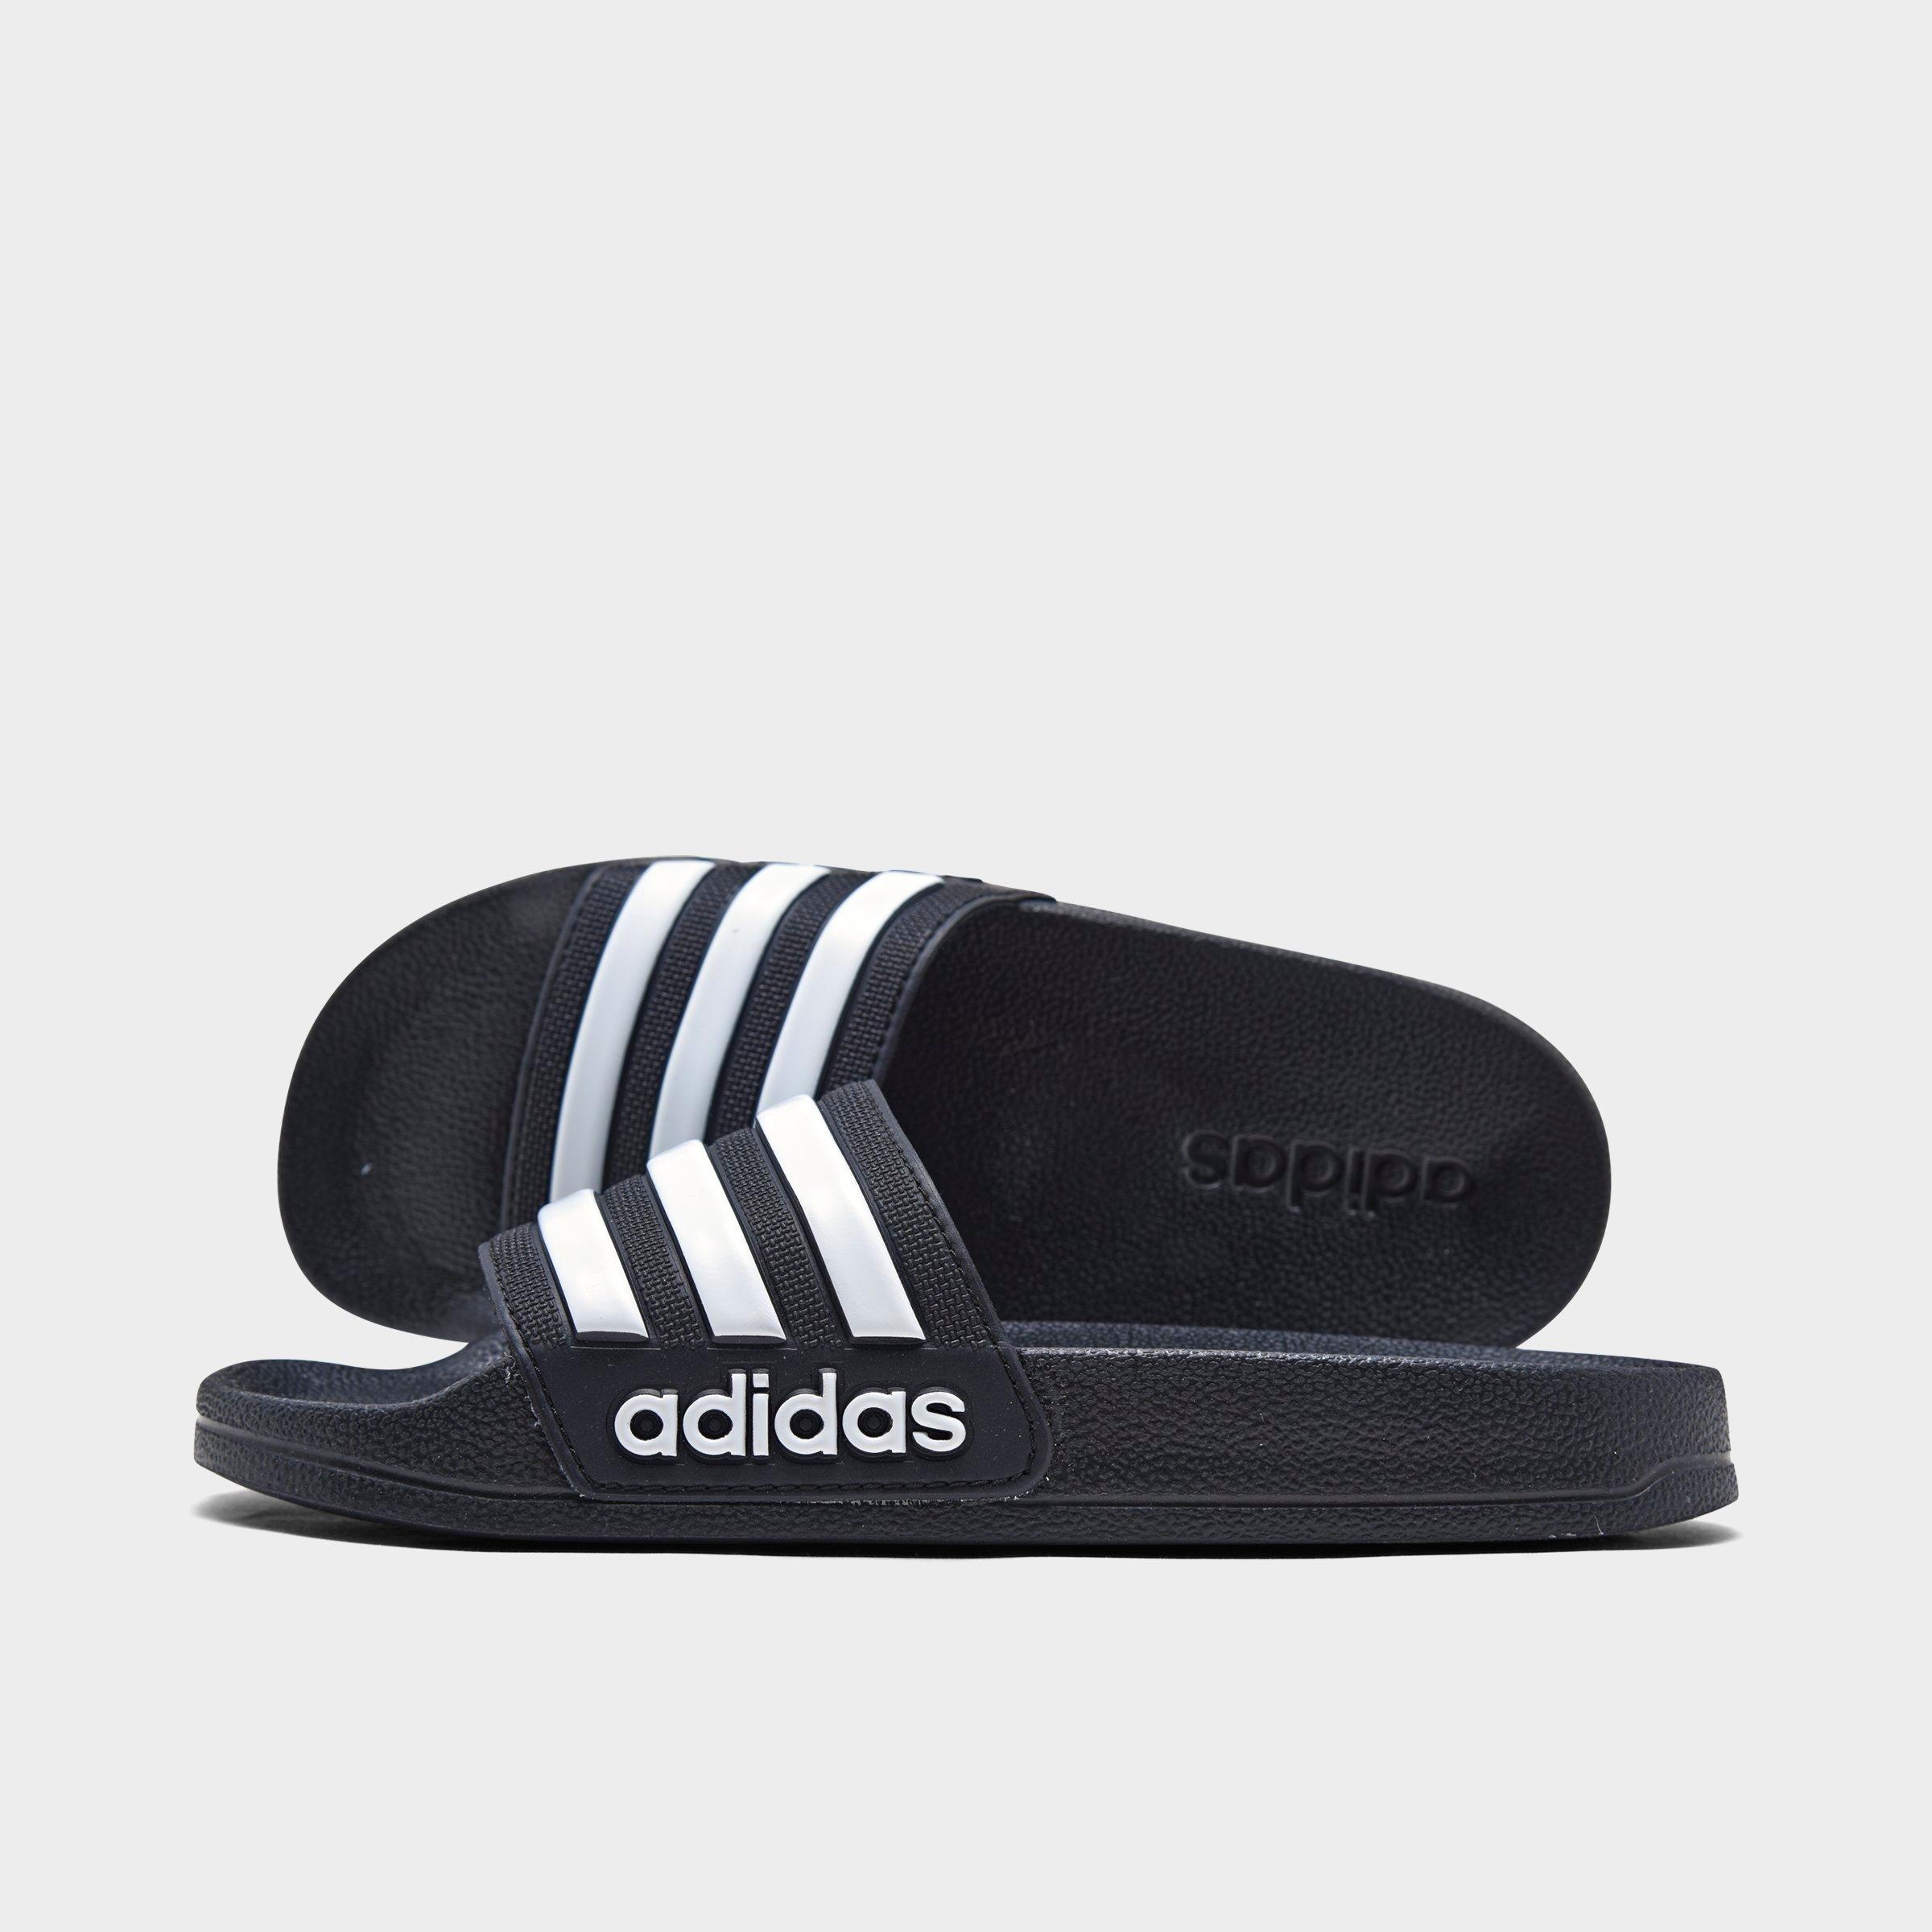 adidas slide on shoes